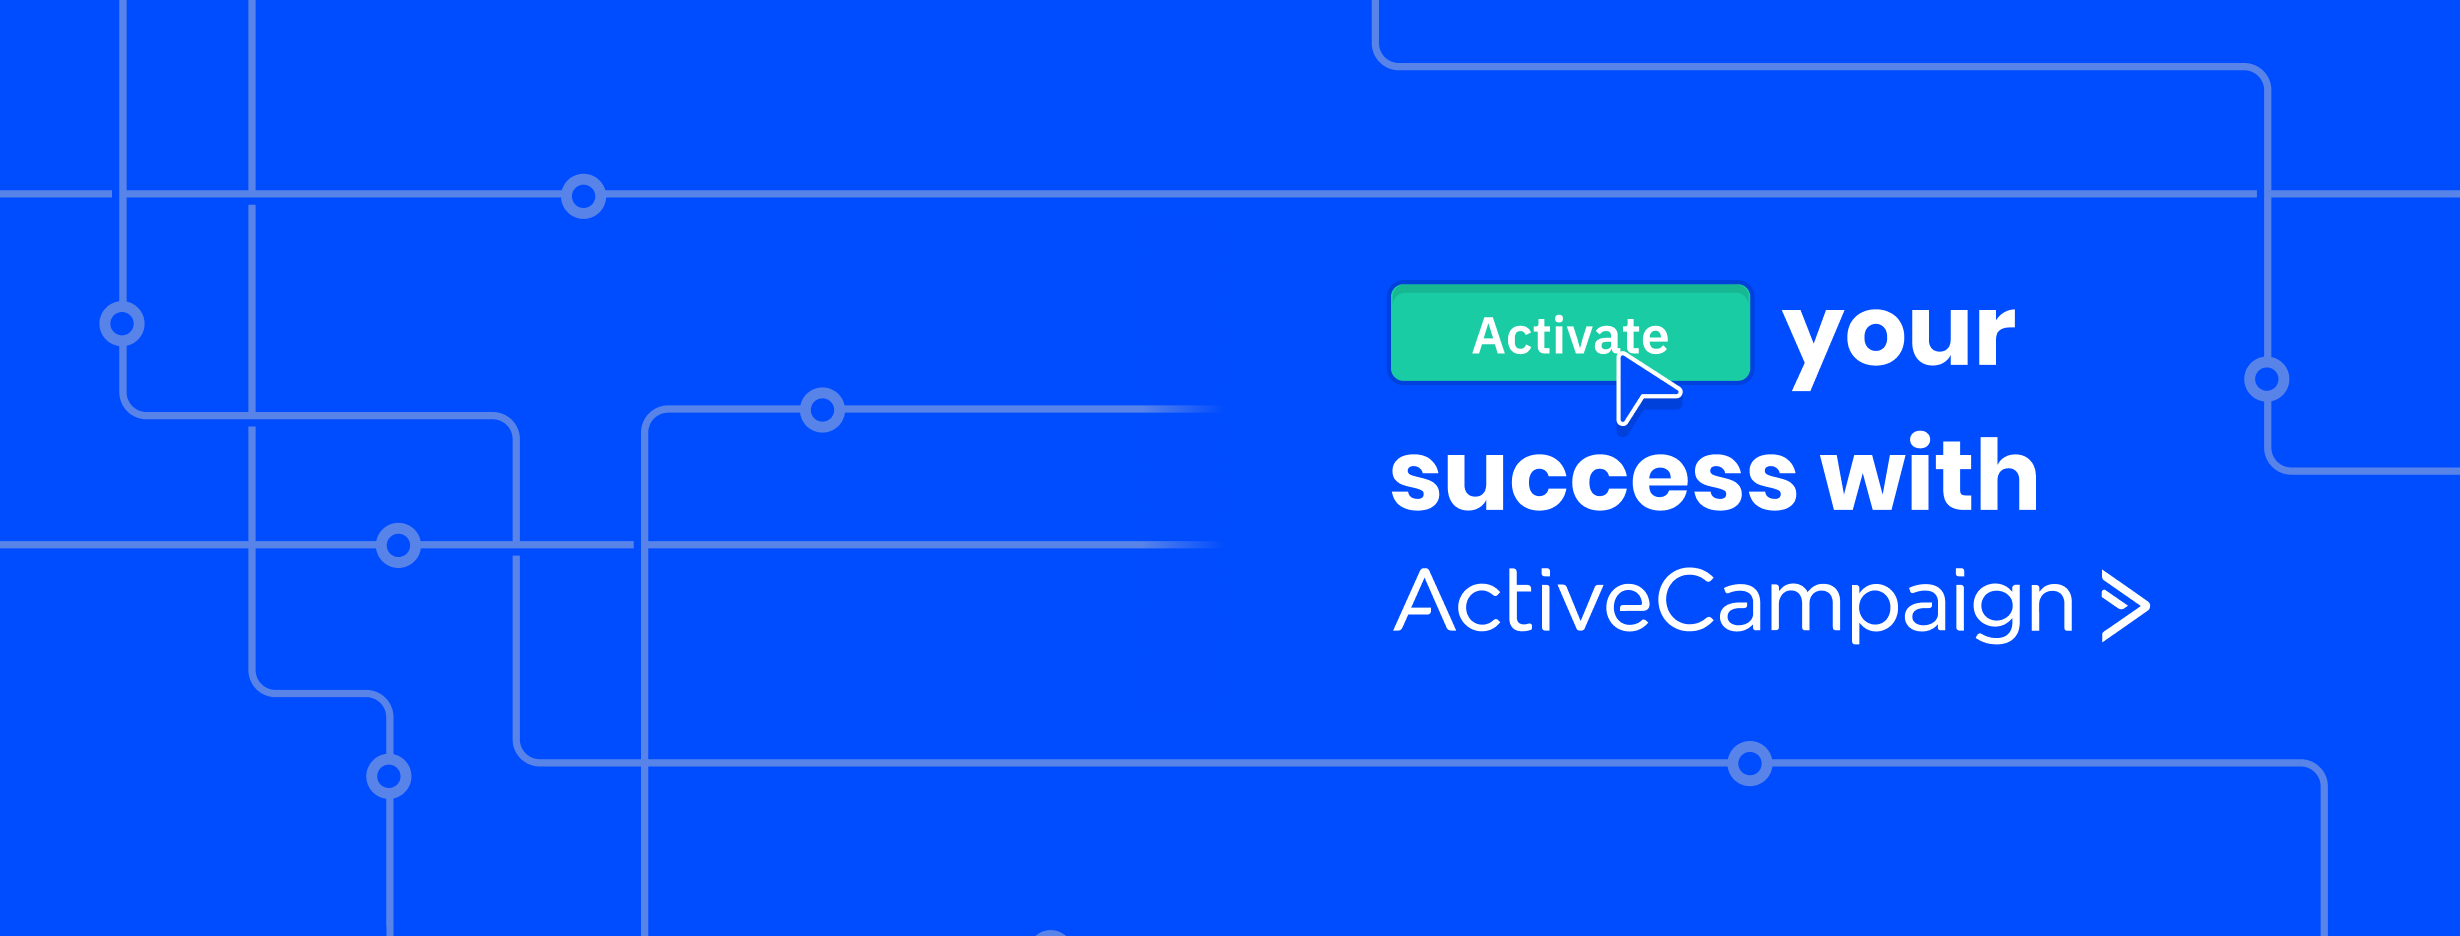 ActiveCampaign - Redefining Marketing Automation